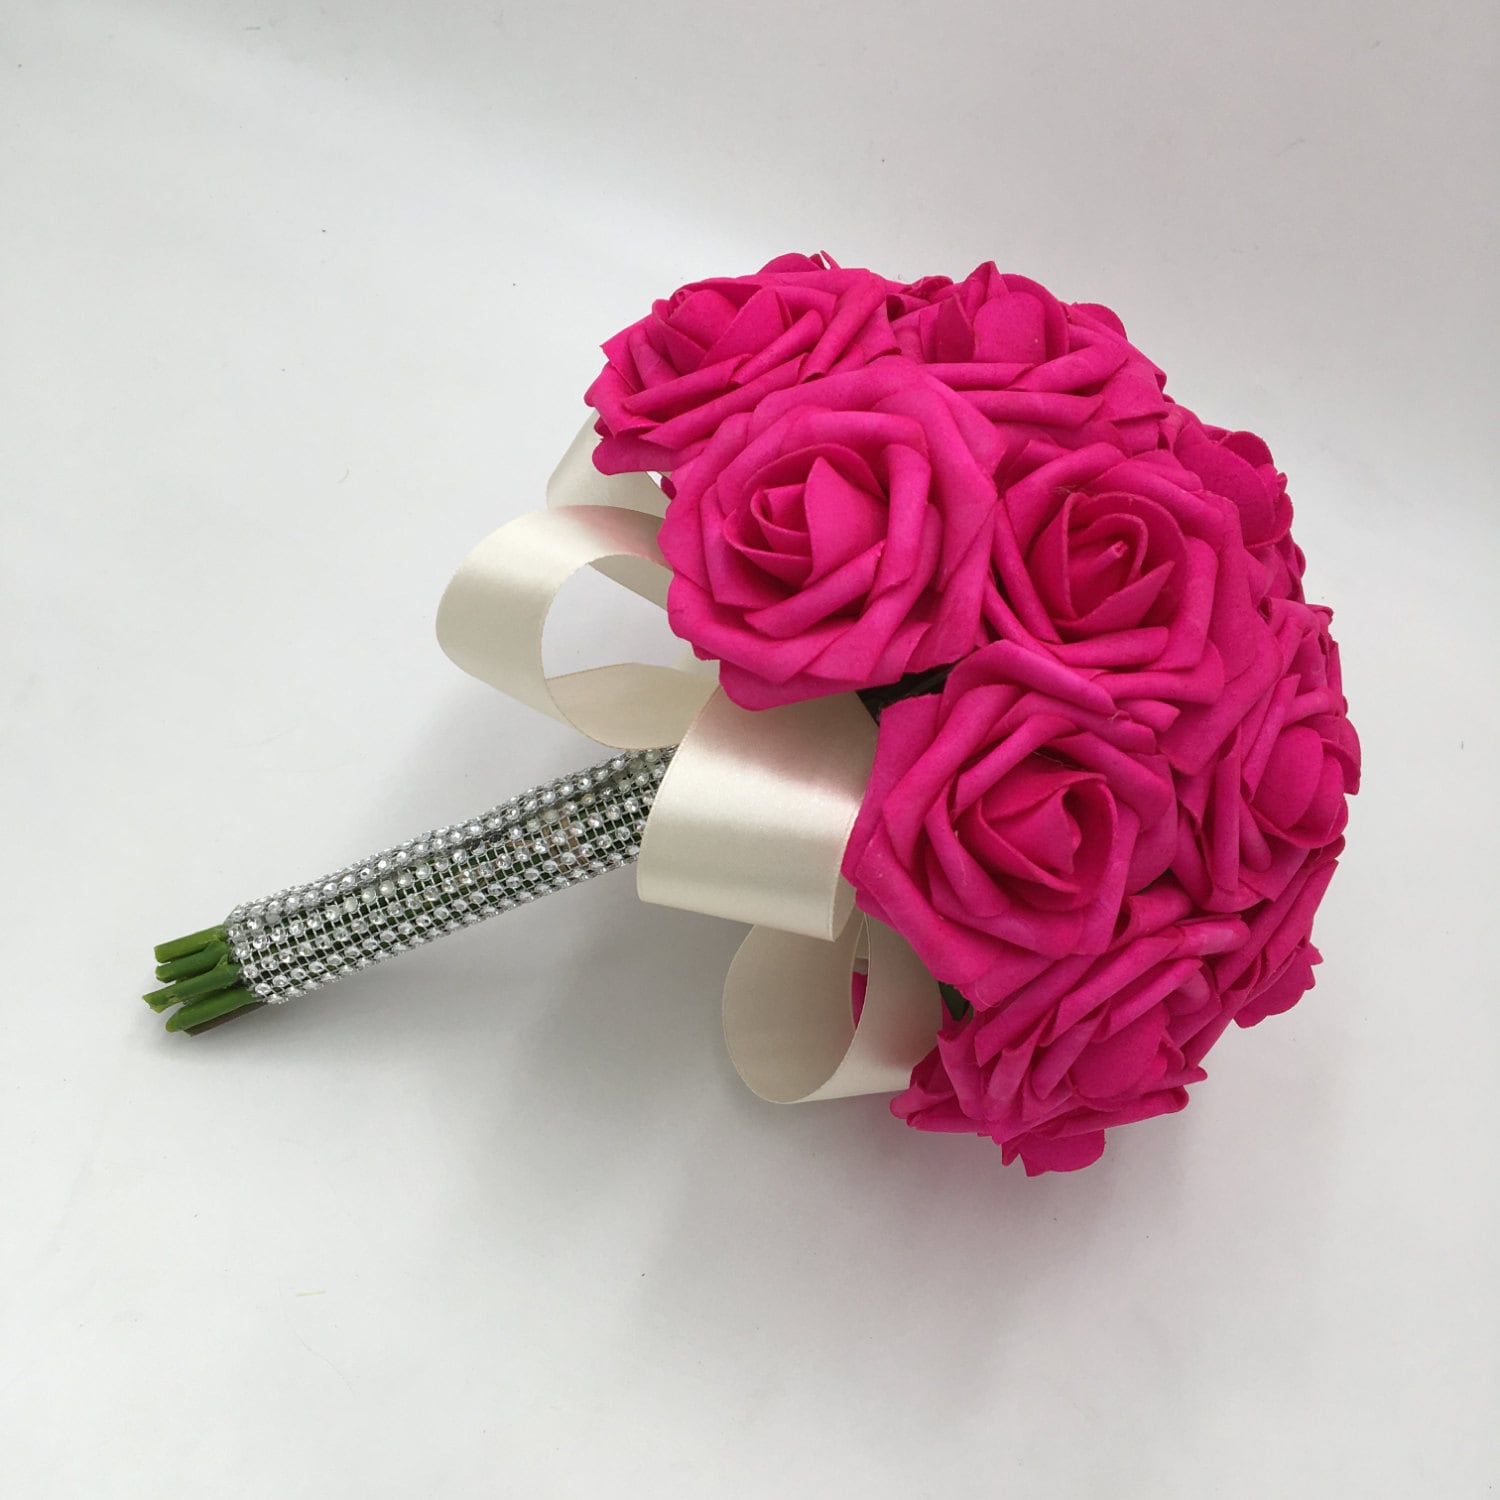 WEDDING FLOWERS ARTIFICIAL PINK IVORY HOT PINK FOAM ROSE BRIDESMAID BOUQUETS X 4 